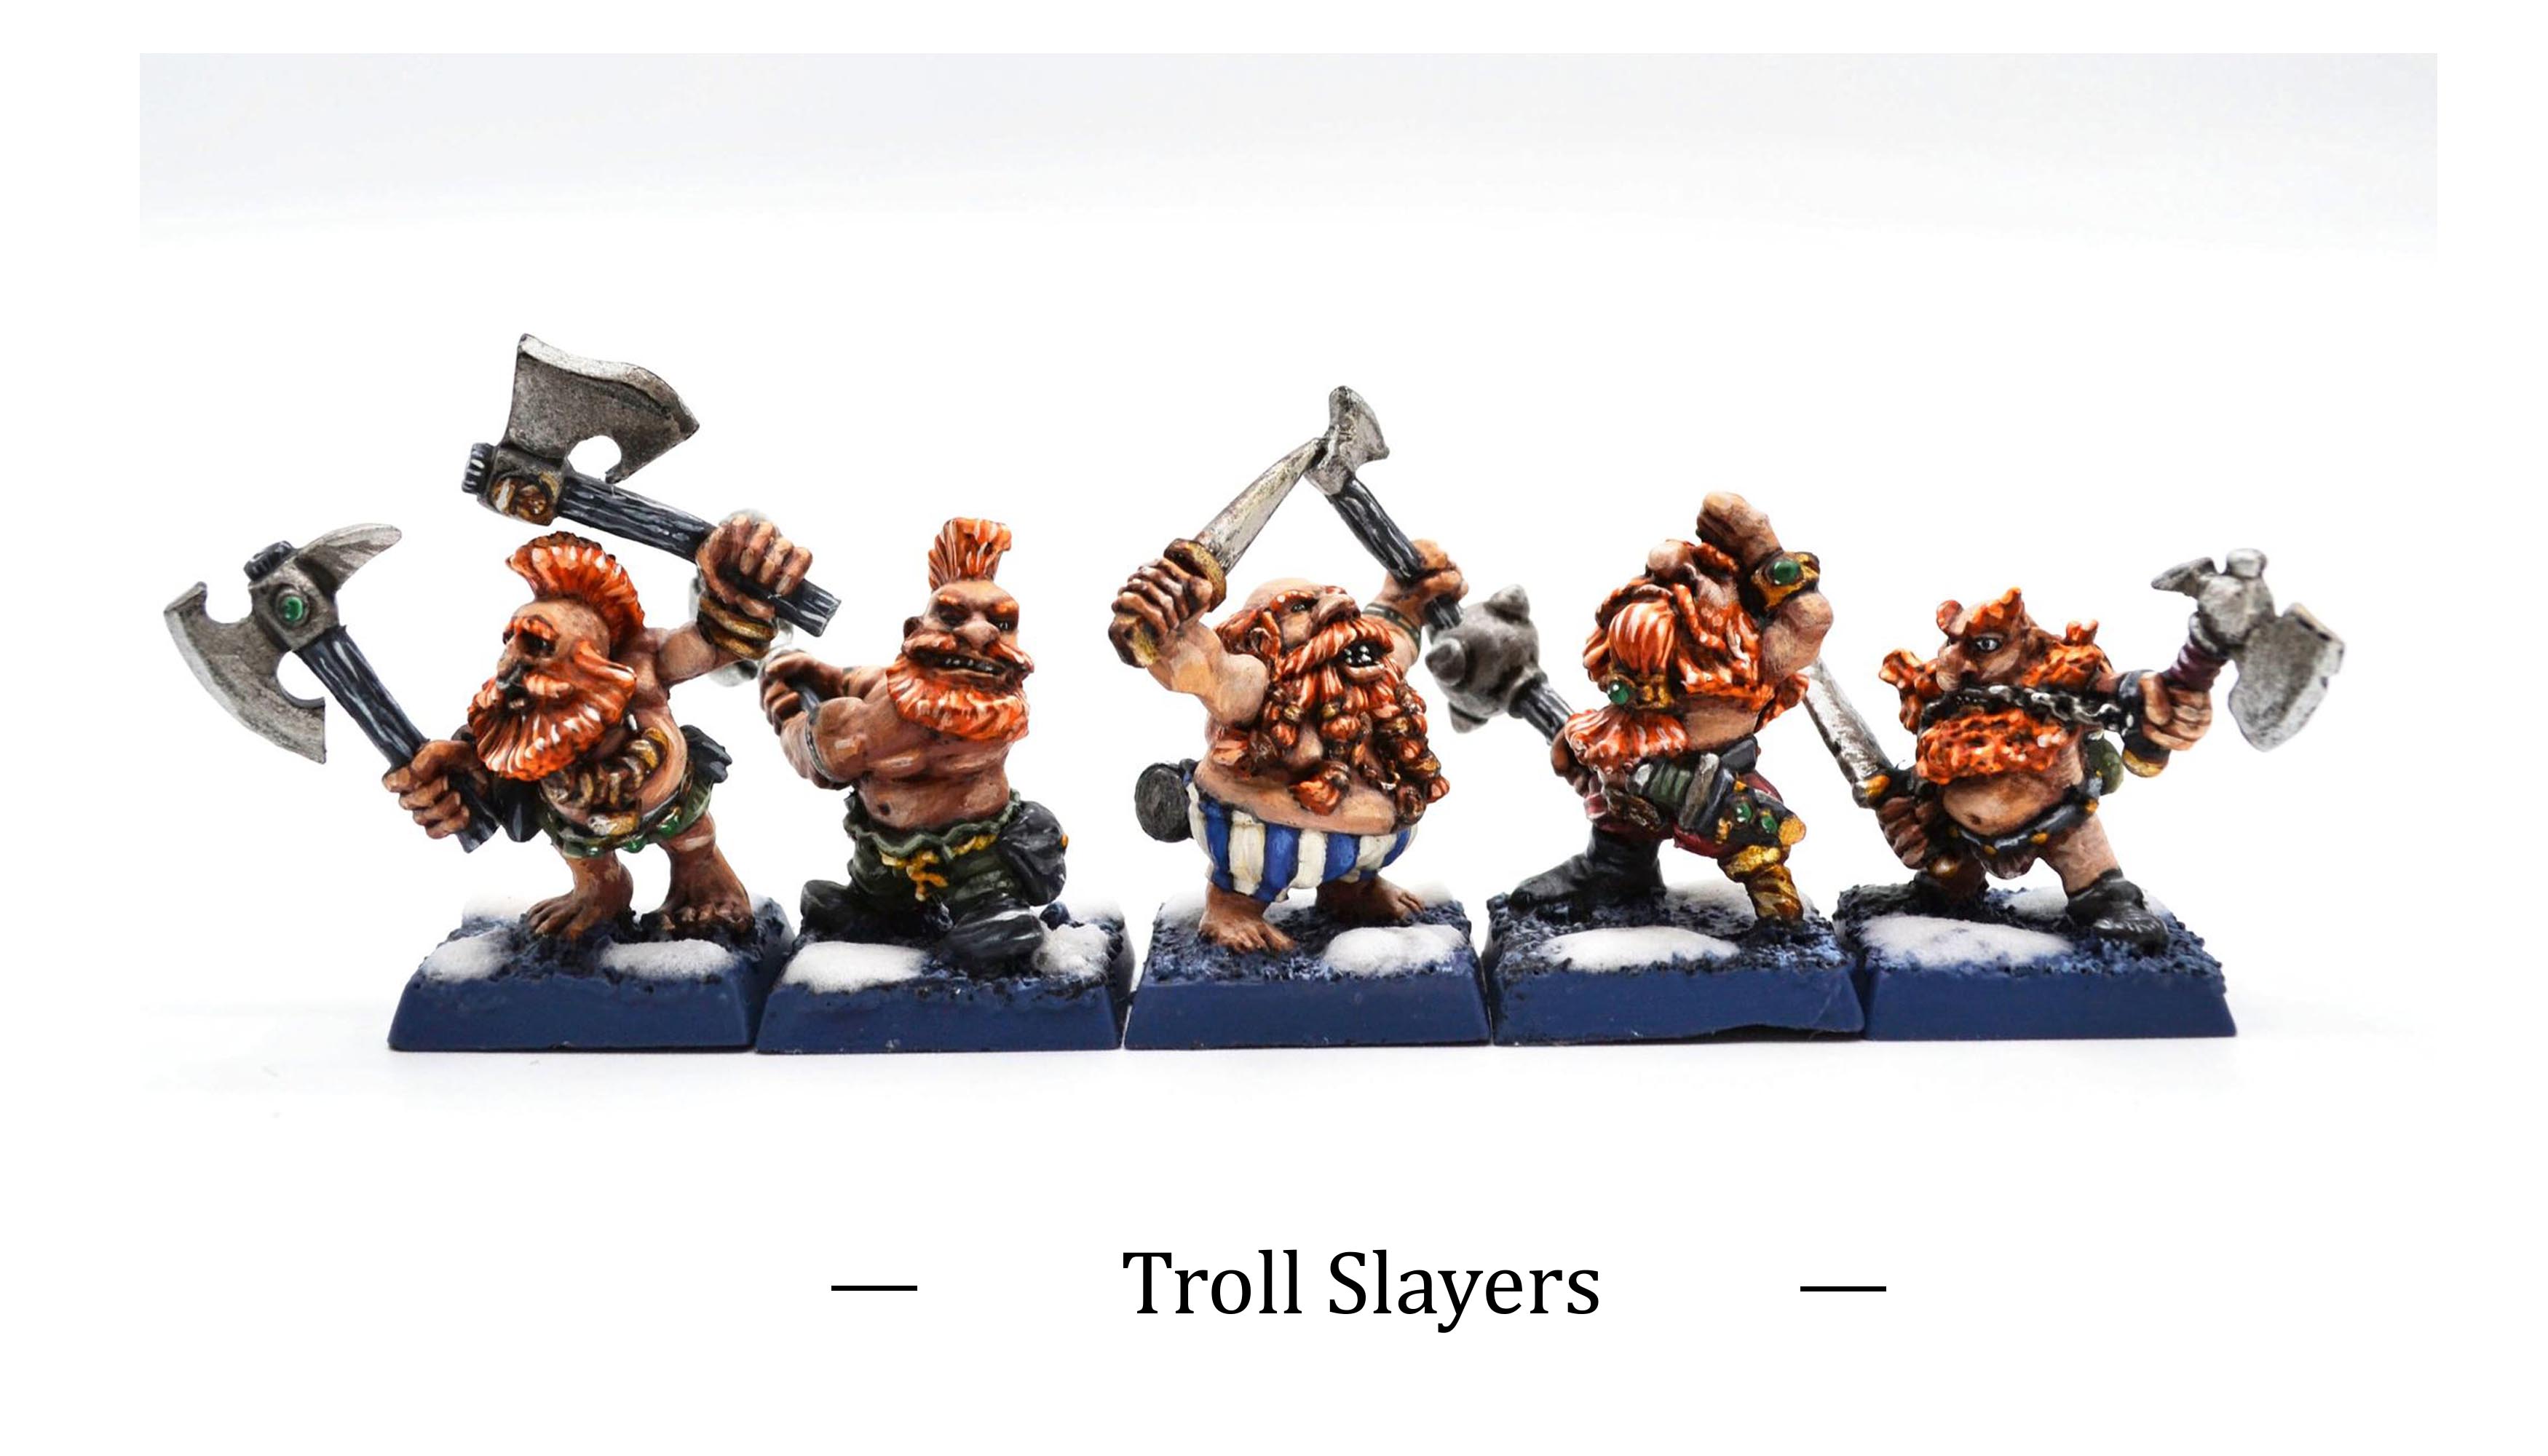 Warhammer Old World Dwarves Troll Sayers miniatures painted by commission painter.